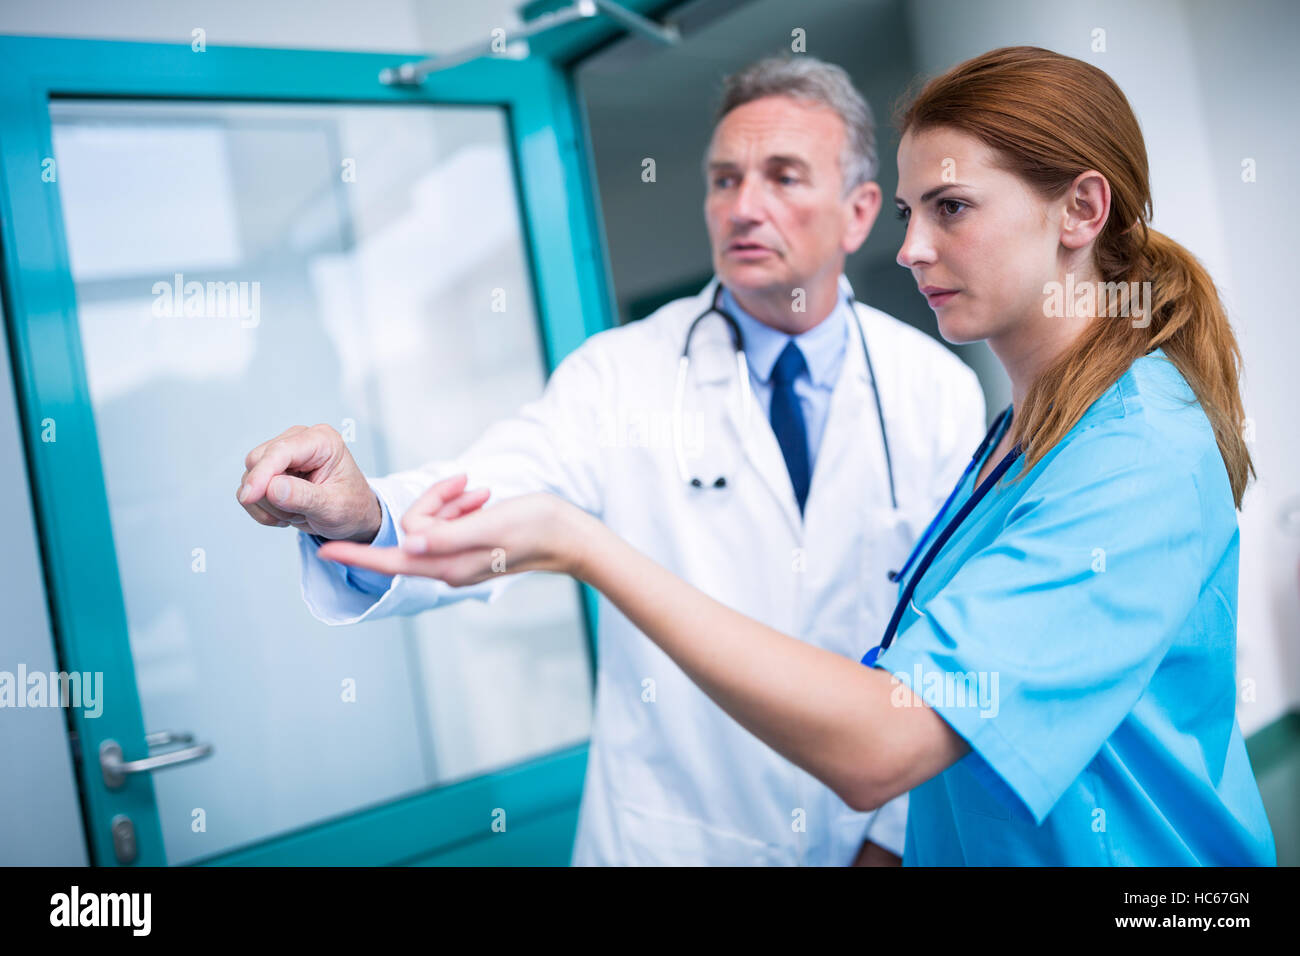 Doctor and surgeon discussing with each other Stock Photo